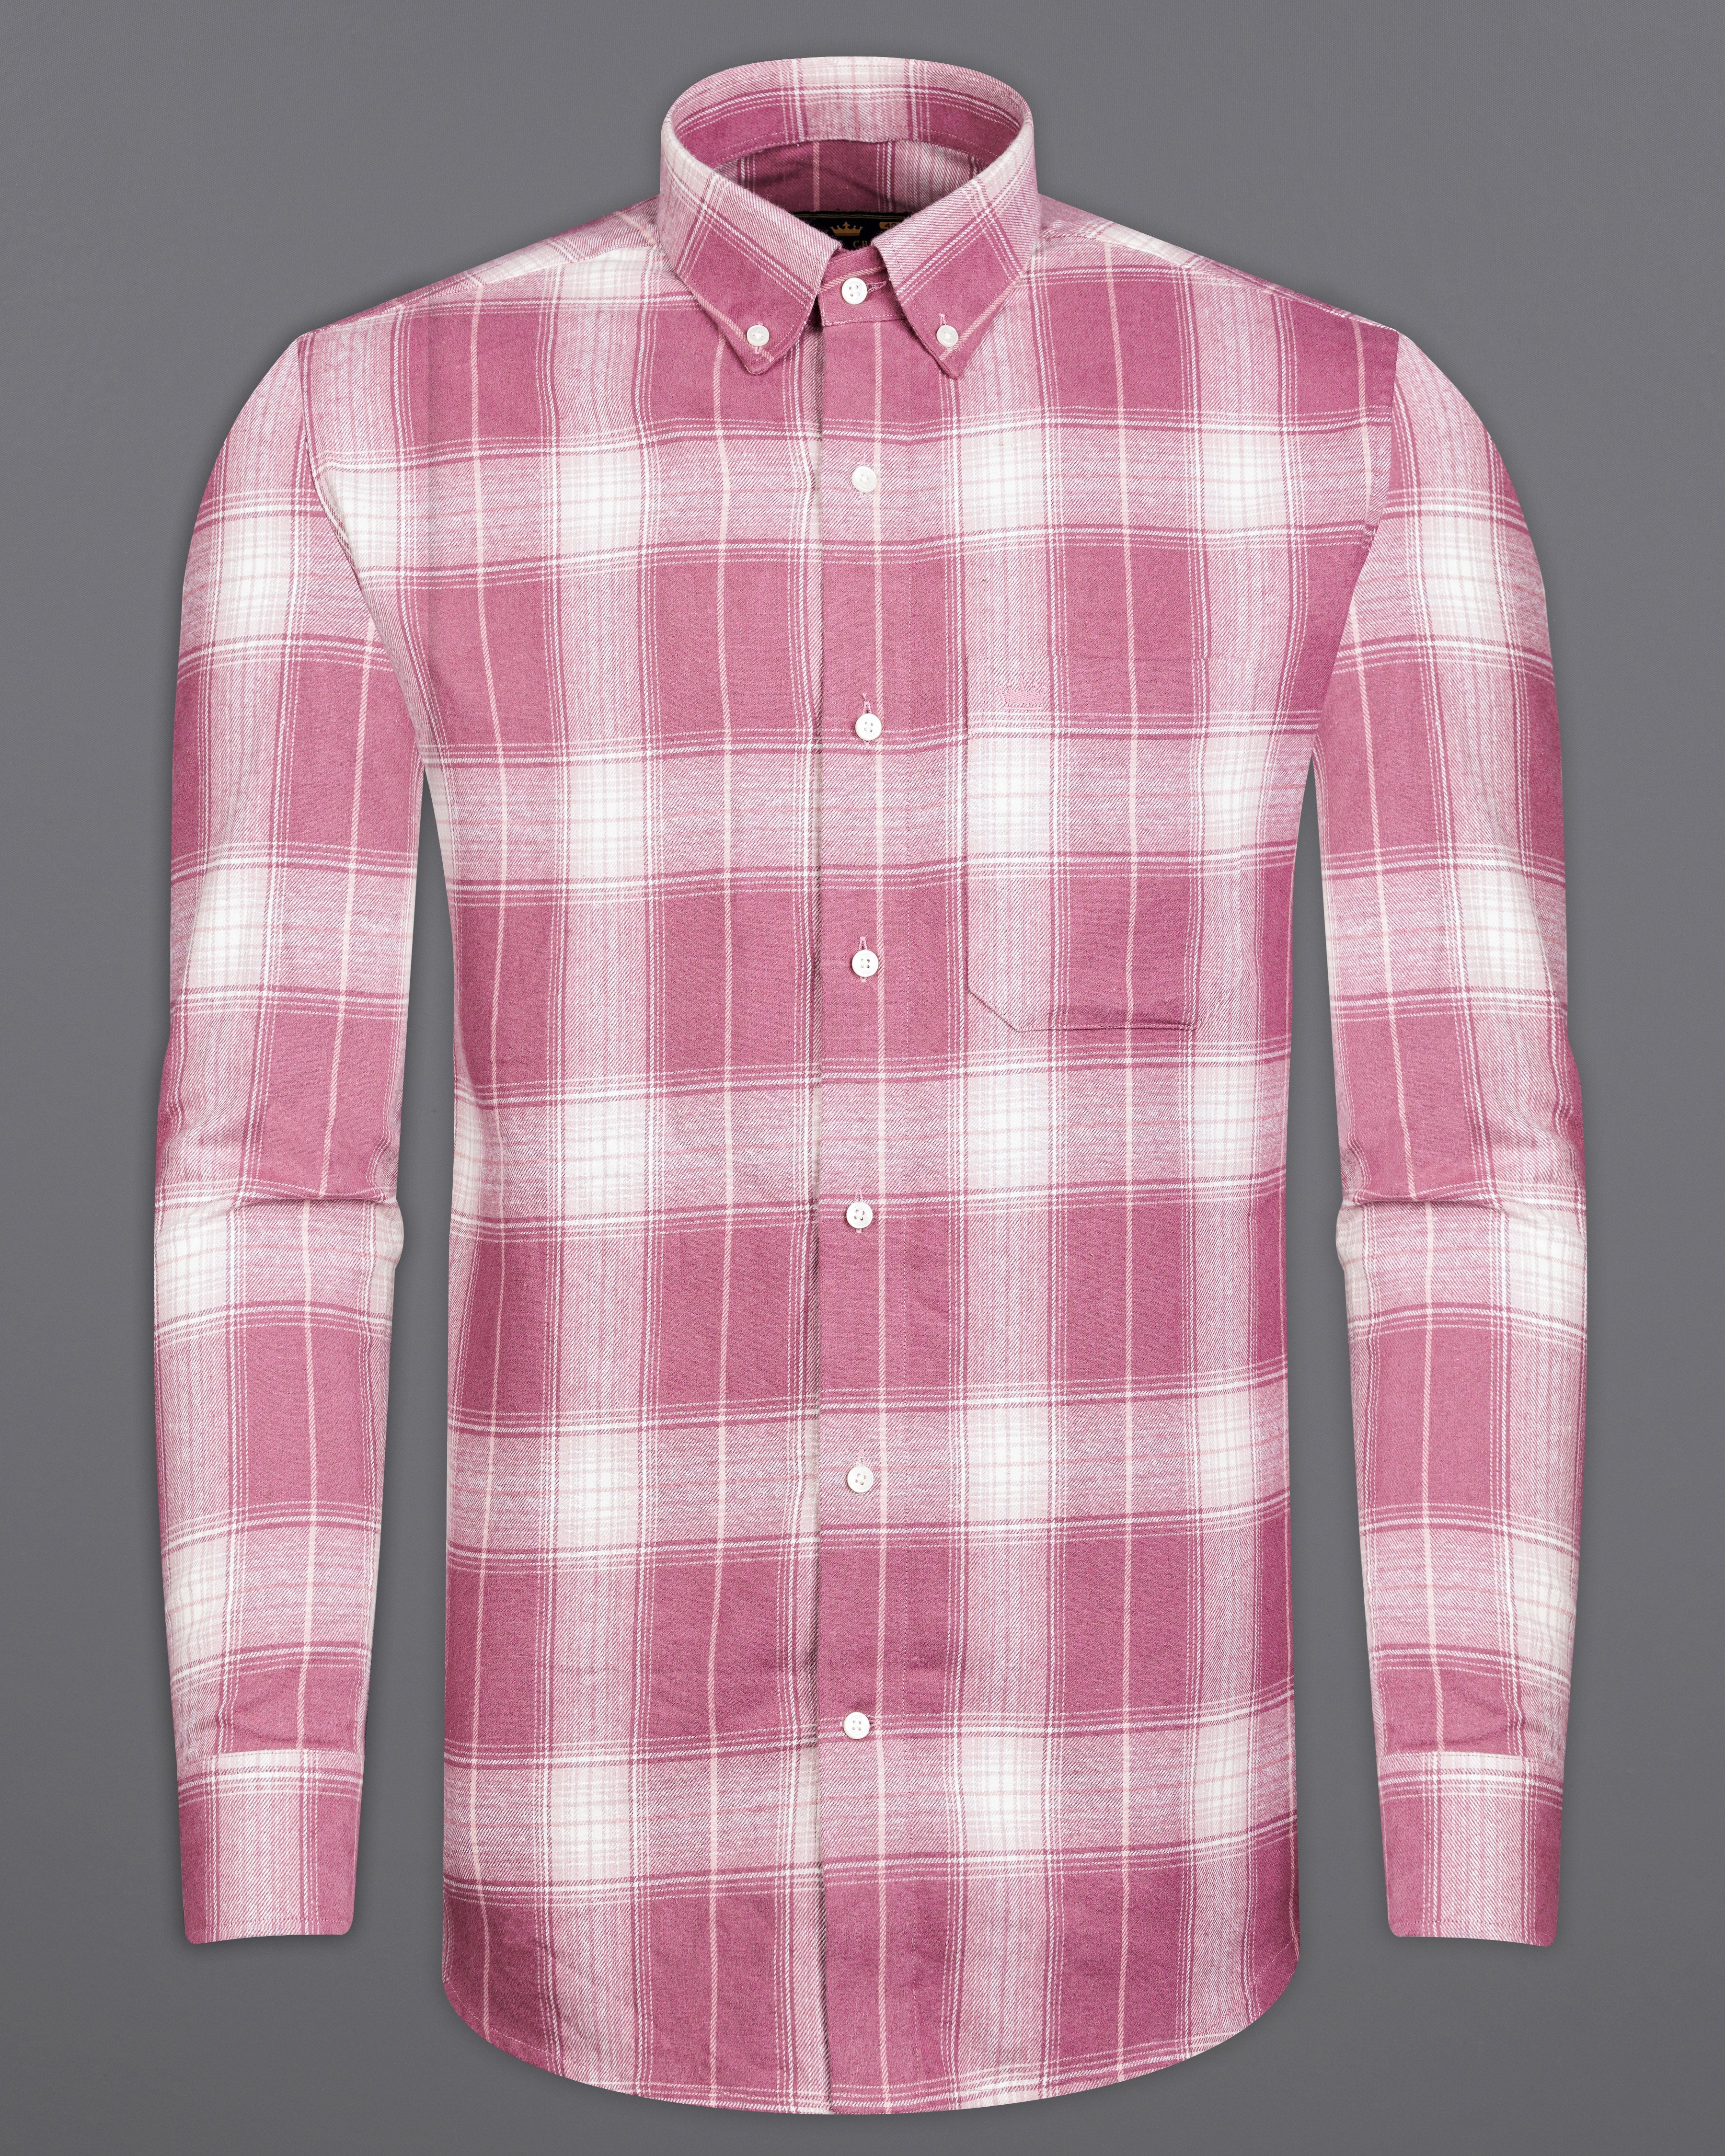 Tapestry Pink with White Plaid Flannel Overshirt/Shacket 9850-BD-OS-38, 9850-BD-OS-H-38, 9850-BD-OS-39, 9850-BD-OS-H-39, 9850-BD-OS-40, 9850-BD-OS-H-40, 9850-BD-OS-42, 9850-BD-OS-H-42, 9850-BD-OS-44, 9850-BD-OS-H-44, 9850-BD-OS-46, 9850-BD-OS-H-46, 9850-BD-OS-48, 9850-BD-OS-H-48, 9850-BD-OS-50, 9850-BD-OS-H-50, 9850-BD-OS-52, 9850-BD-OS-H-52